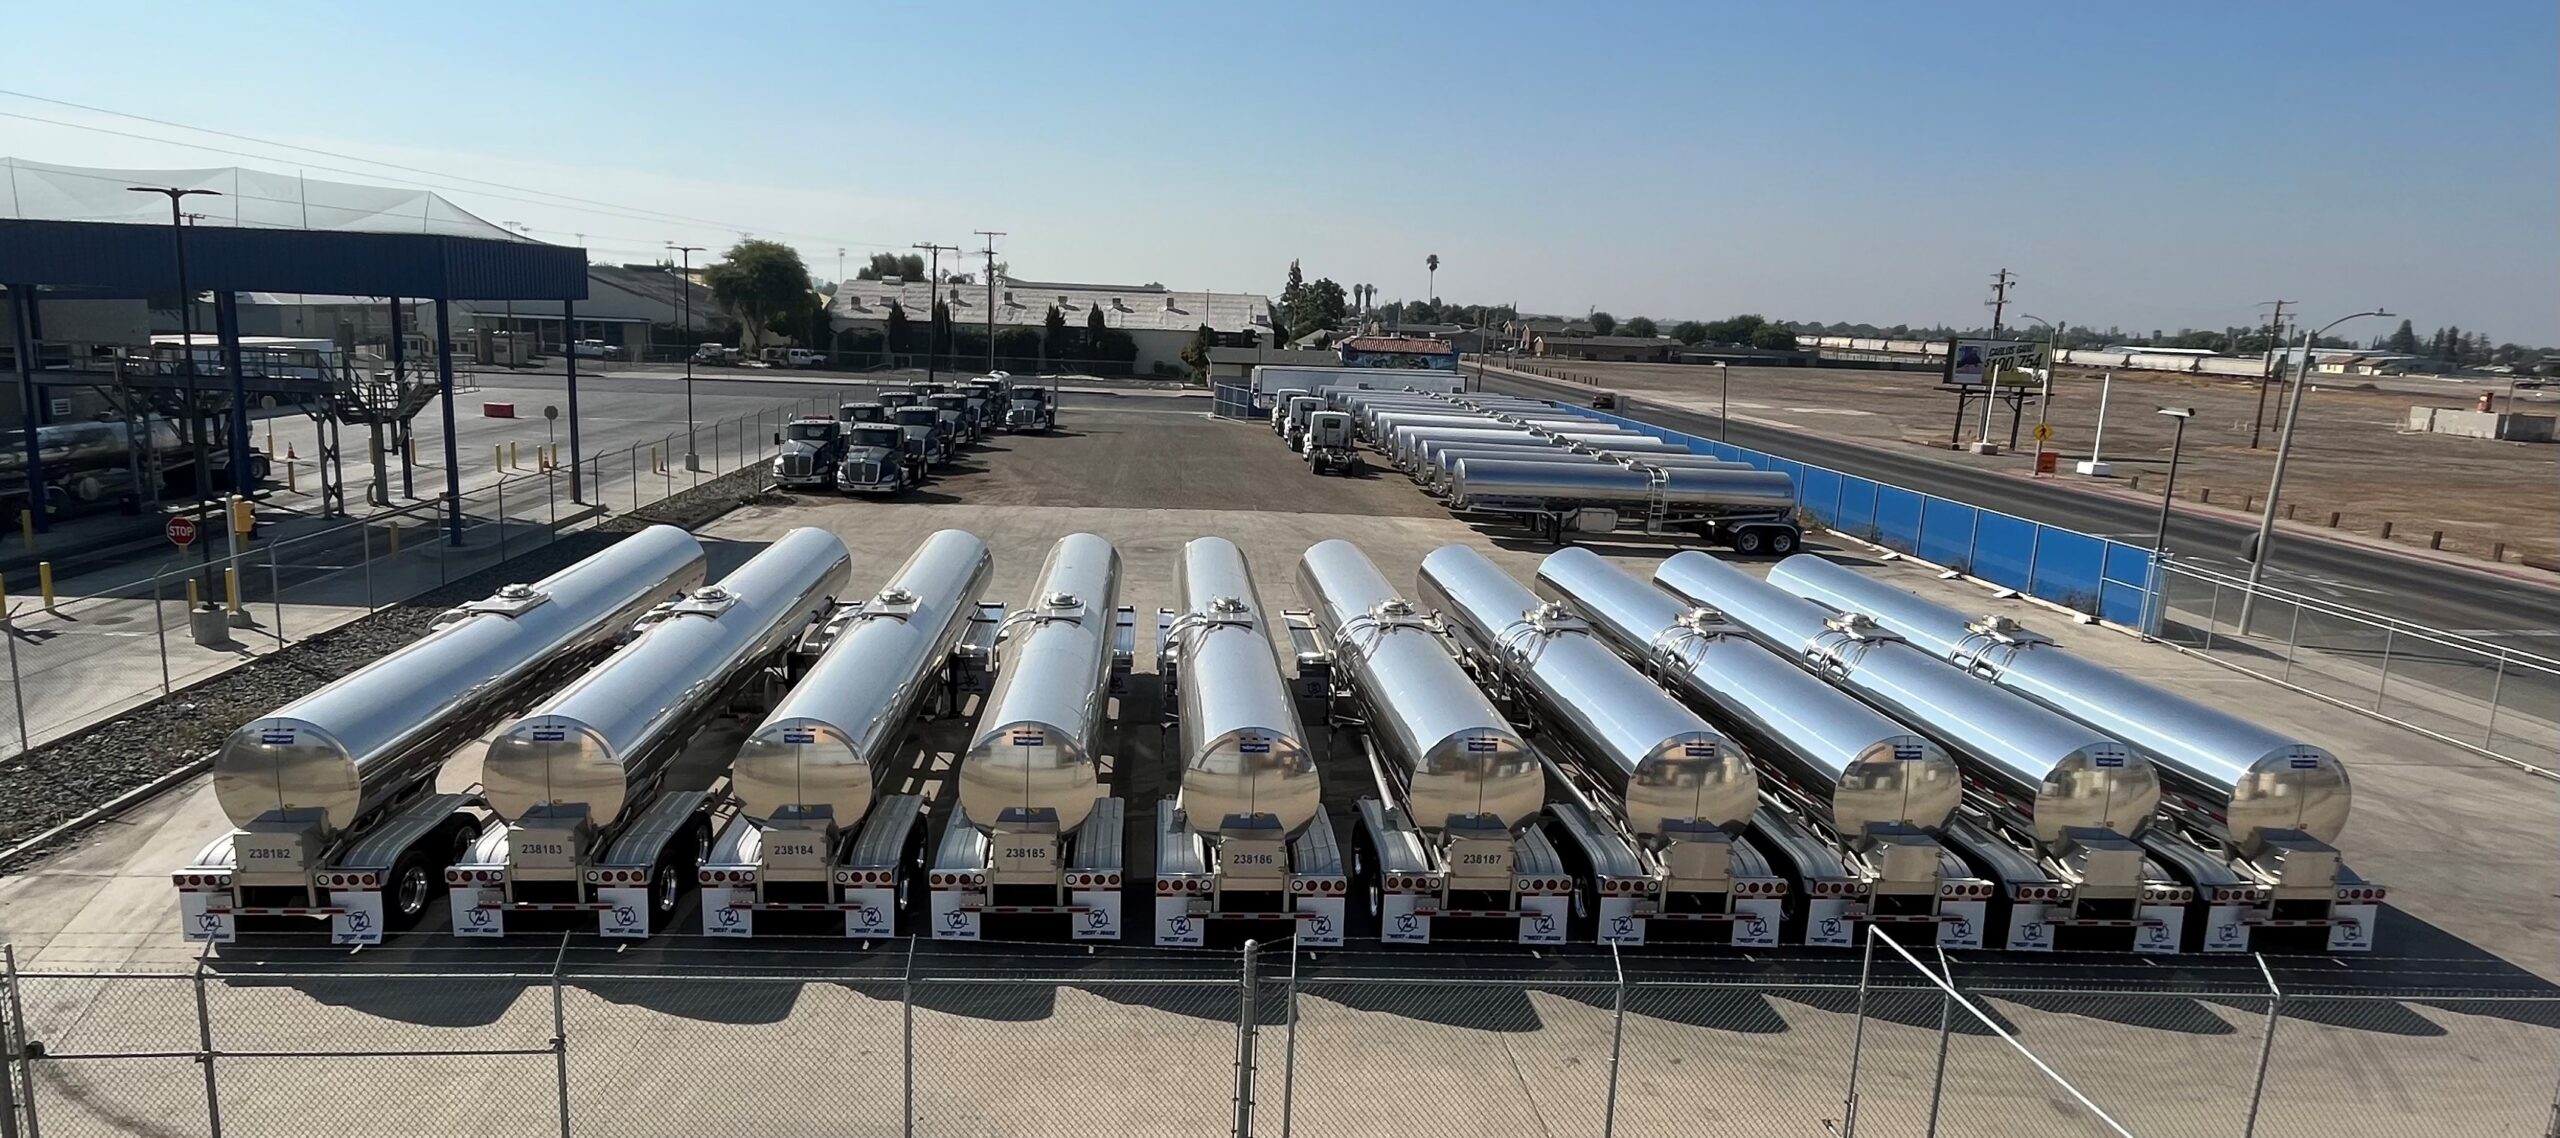 10 Shiny New 6700 Gallon Milk Tank Trailers Delivered to Fresh Fleet